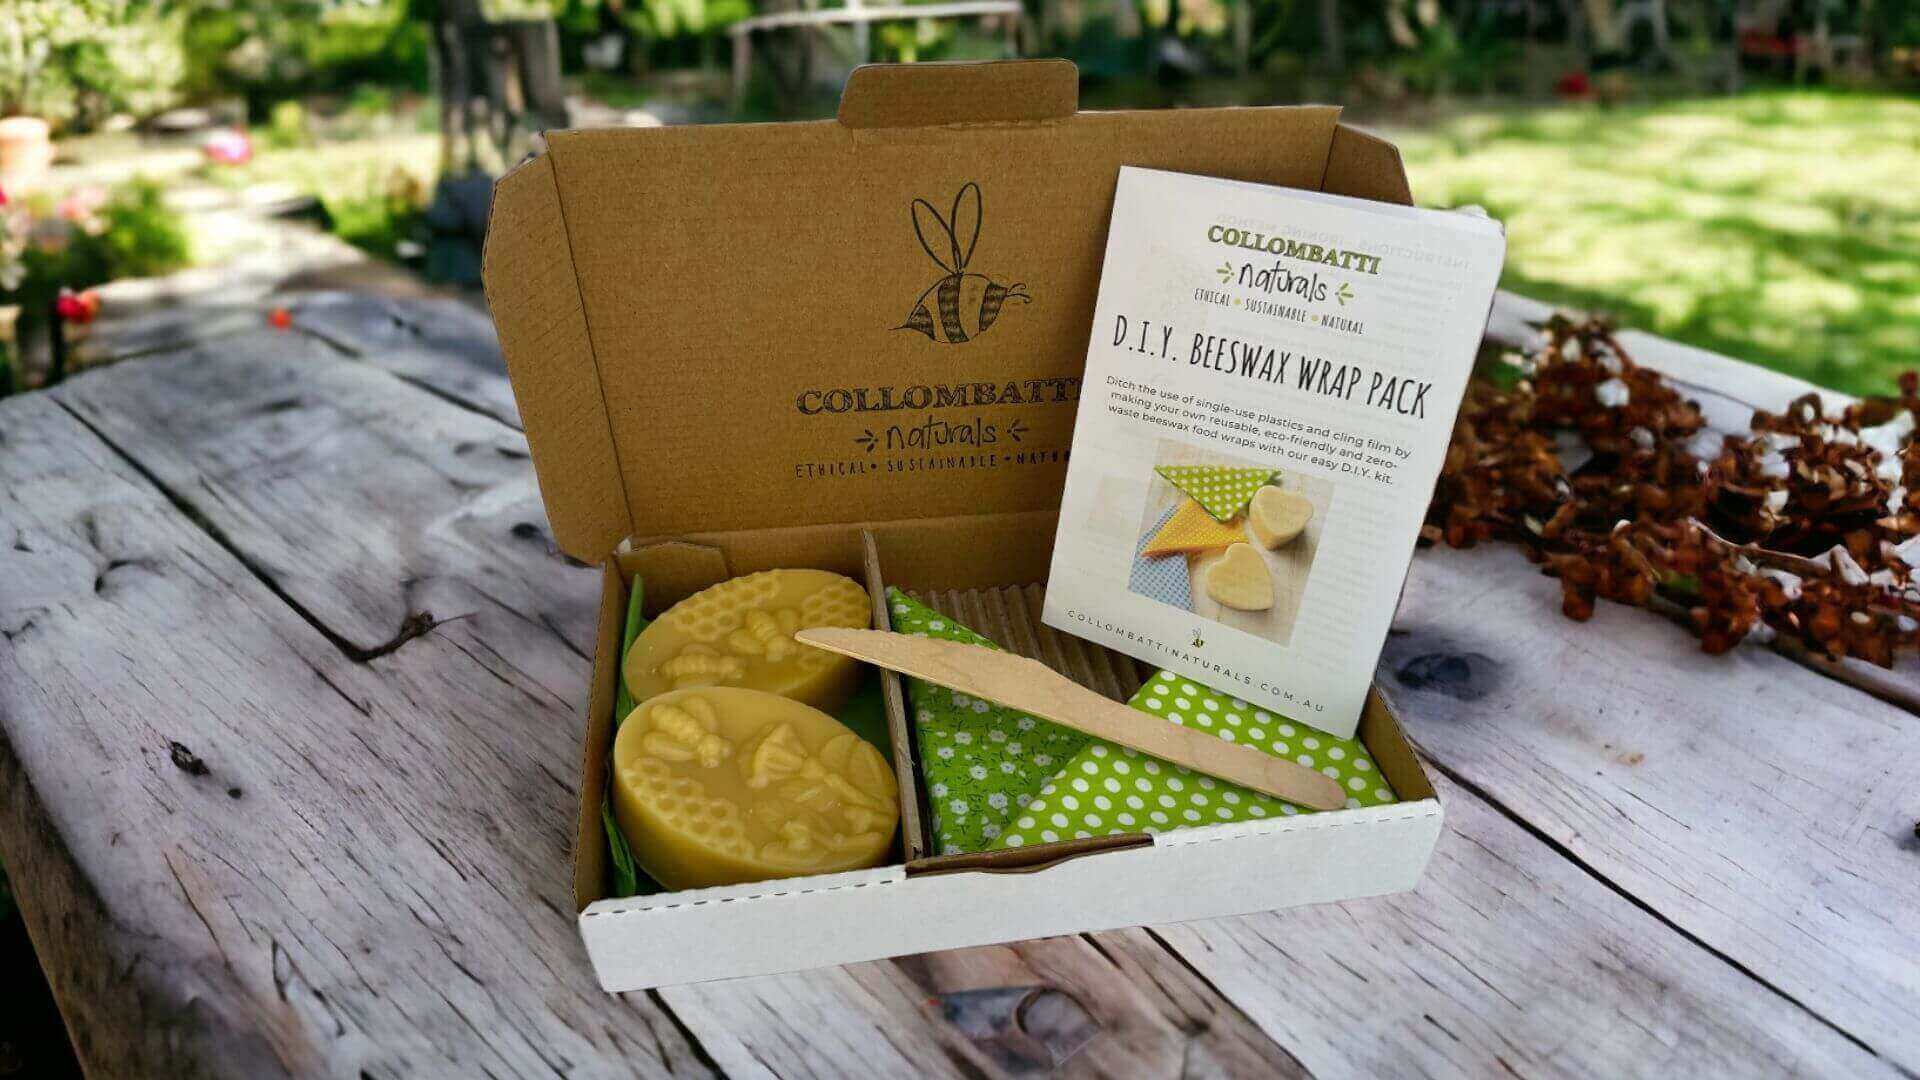 Collombatti naturals 5 ways to reduce waste over Christmas picture of our beeswax wrap kit on a wooden table